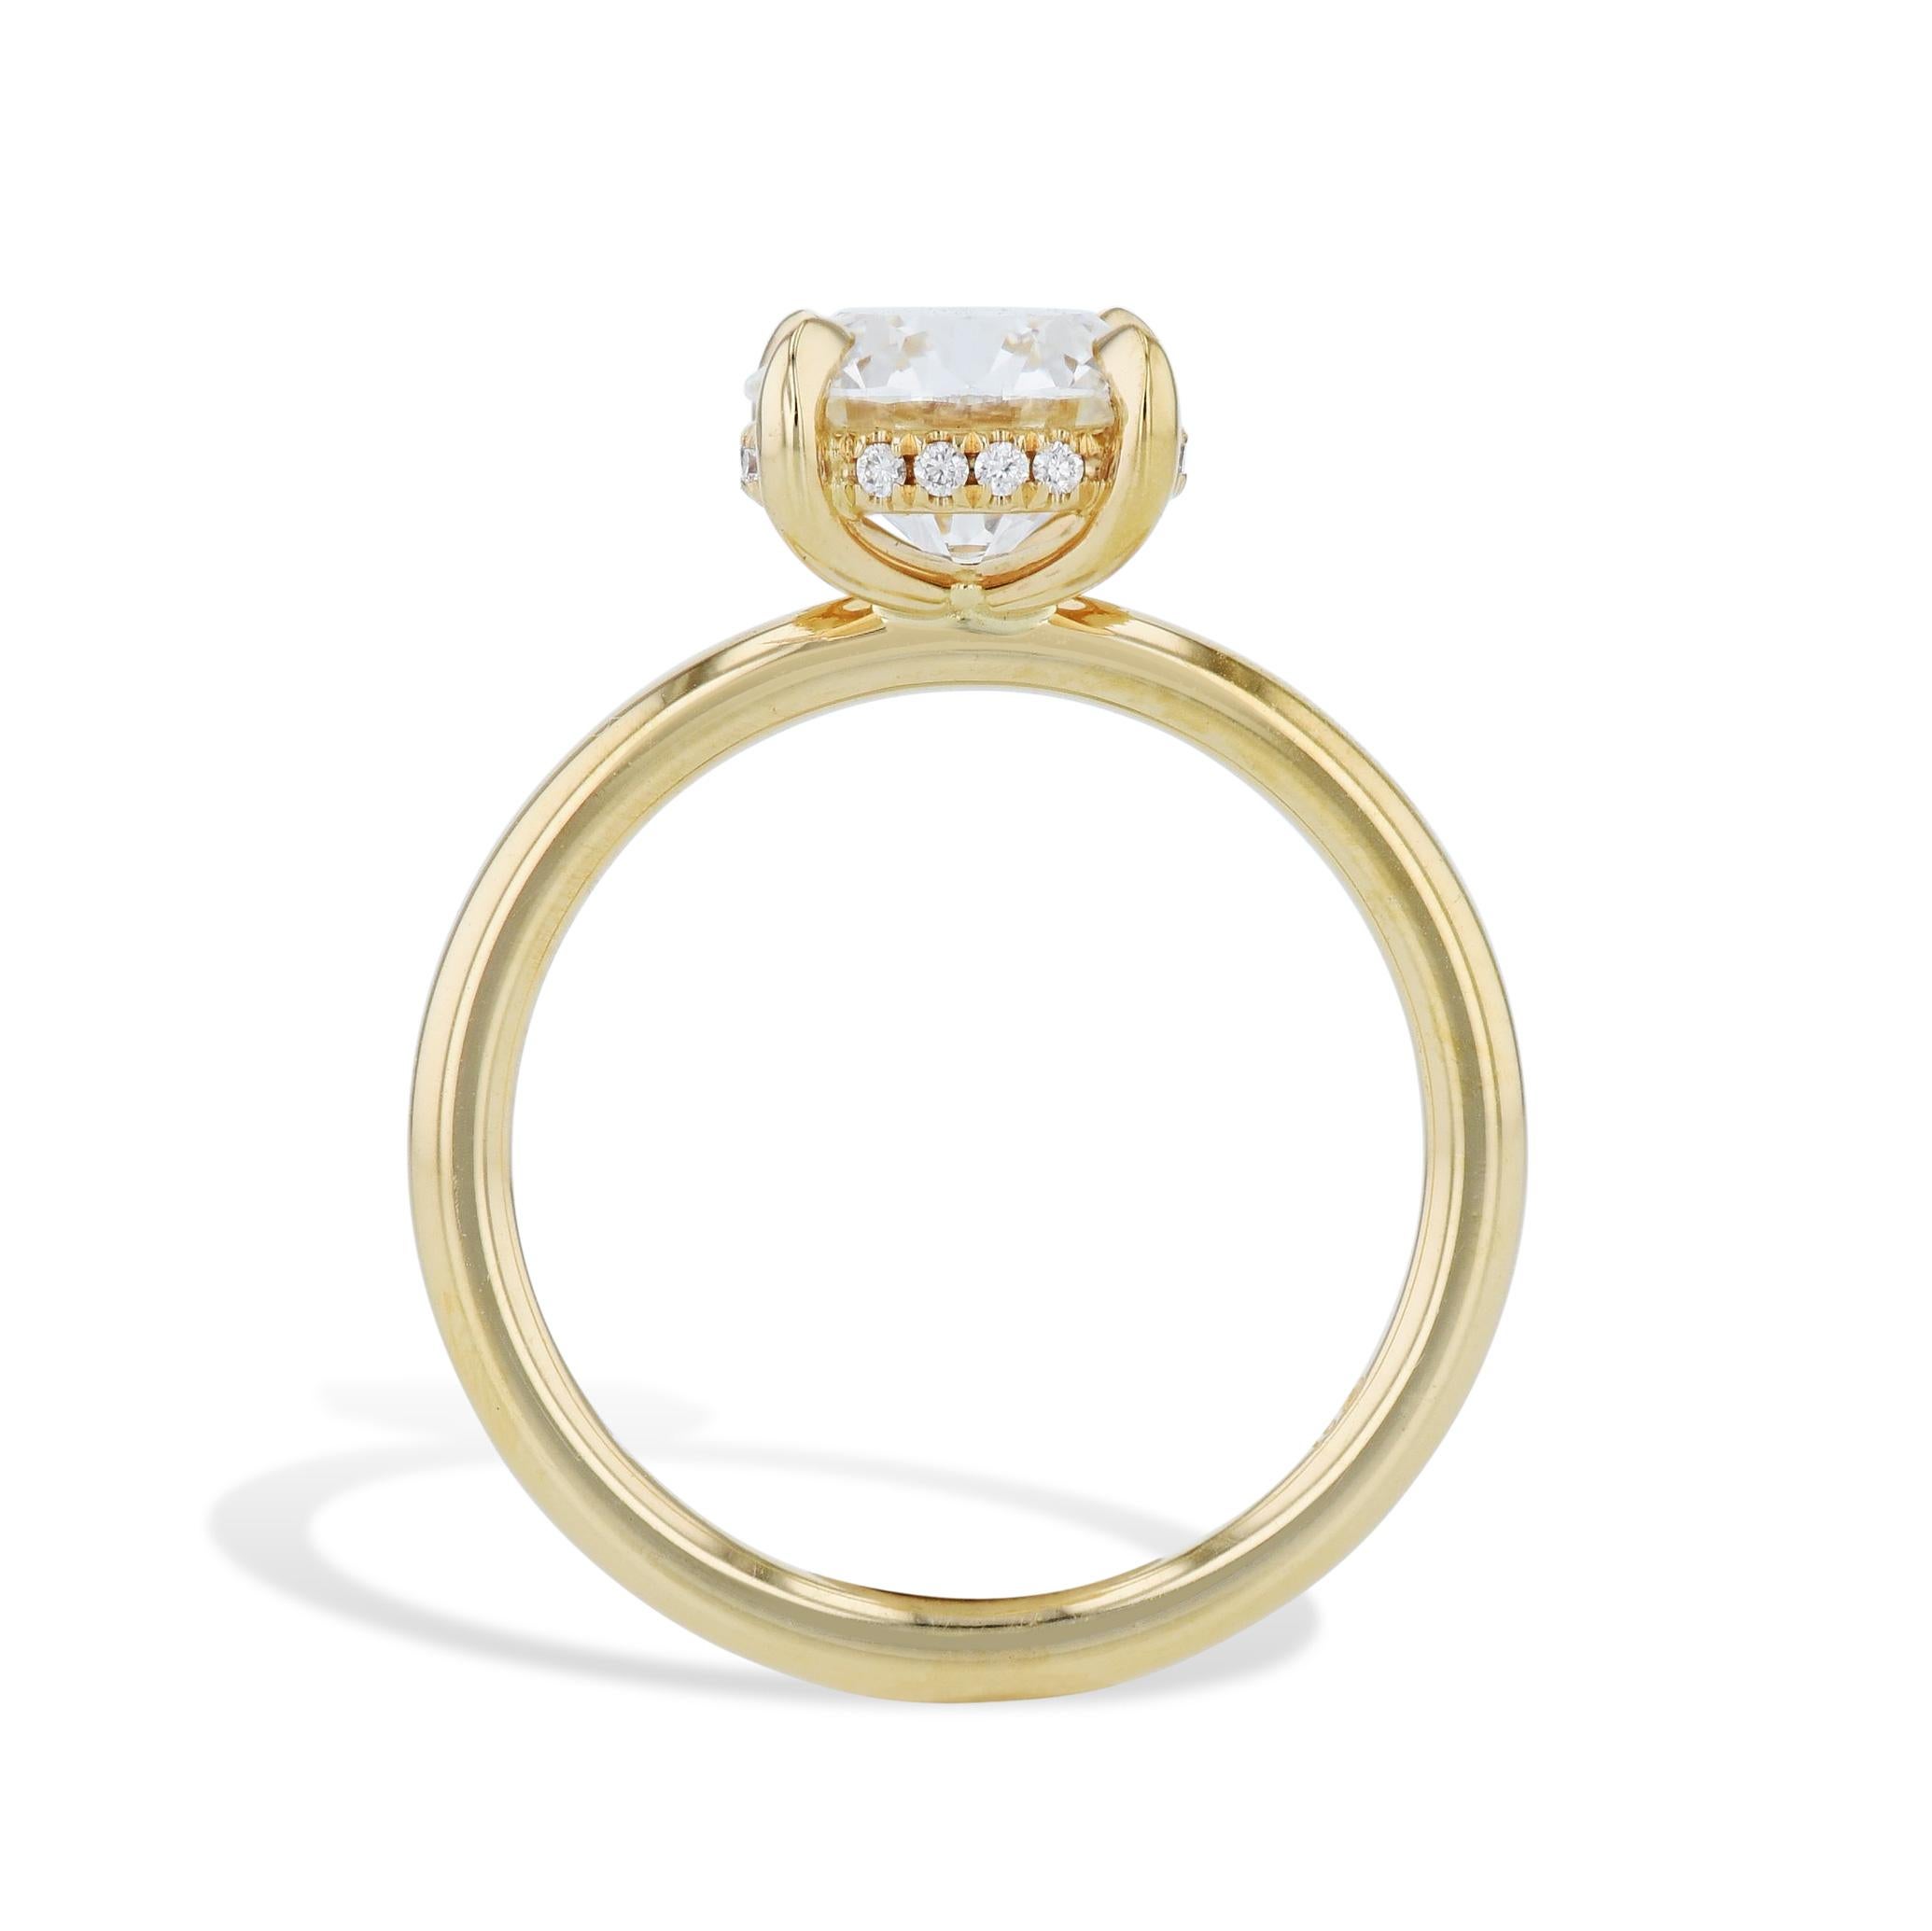 This magnificent handcrafted 2.09 carat round diamond engagement ring will make your beloved feel like royalty! Set in a luxurious 18kt. Yellow Gold, the beautiful center diamond is complemented with diamond pave under the basket, making it an